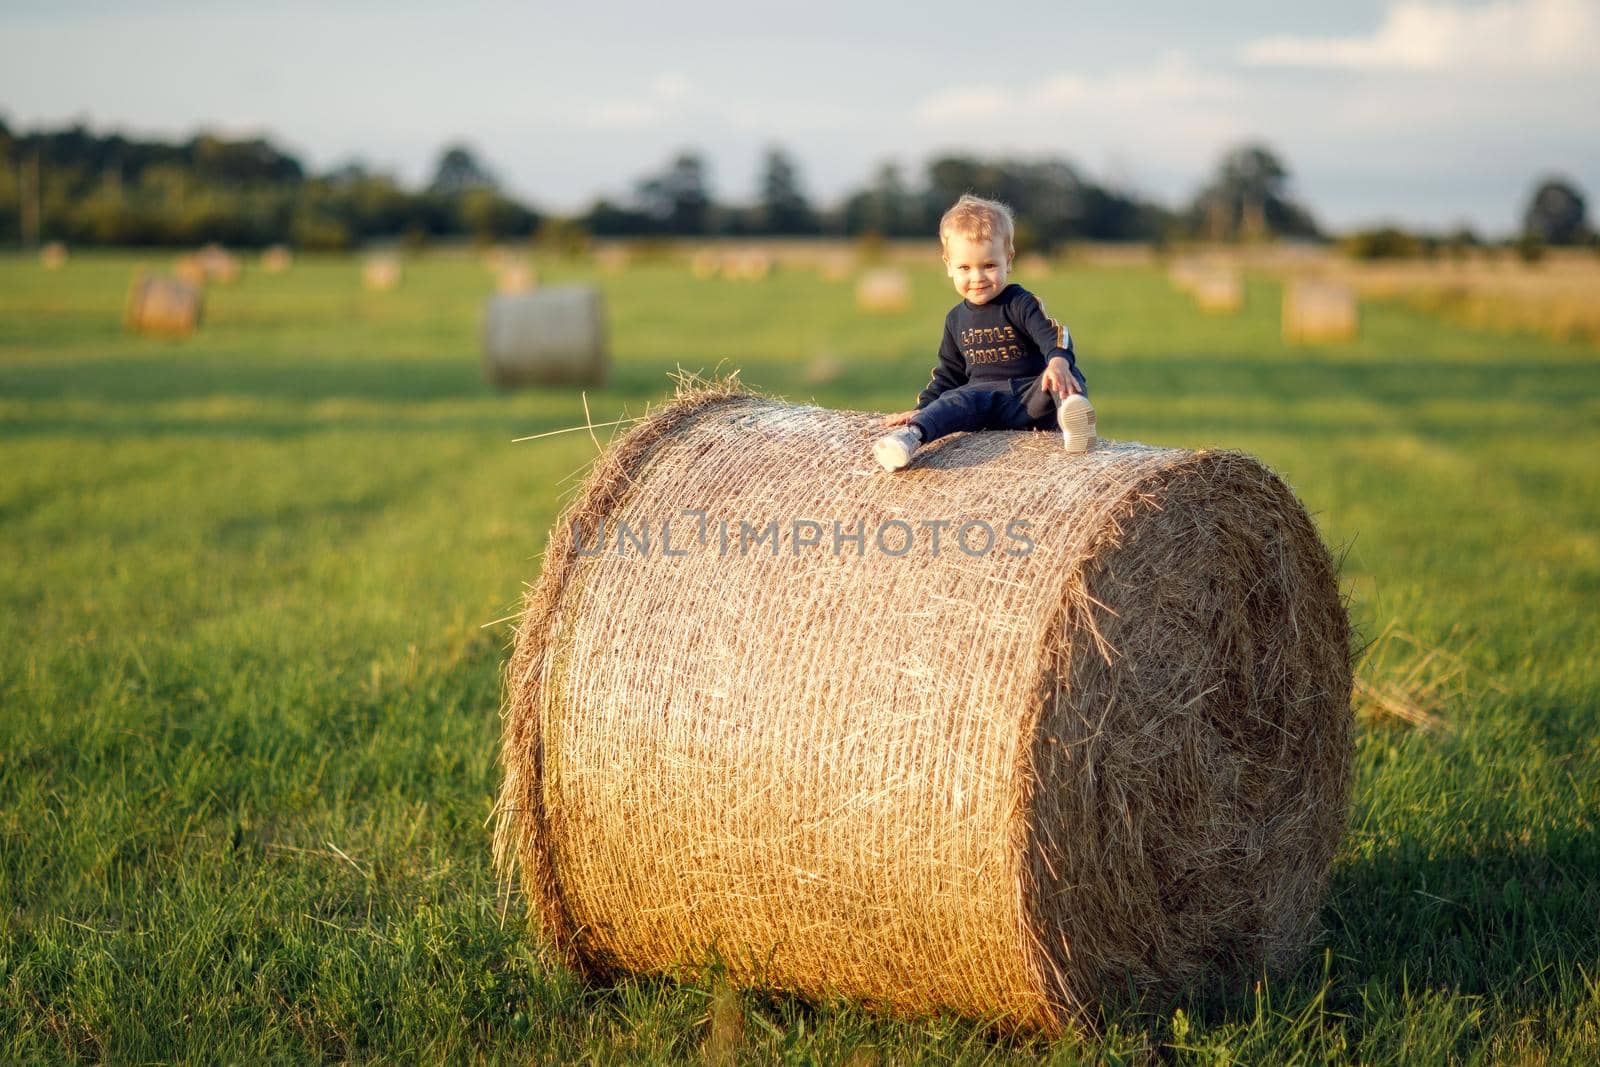 The little boy sits on a large roll of hay in a green meadow, posing beautifully with a smile.